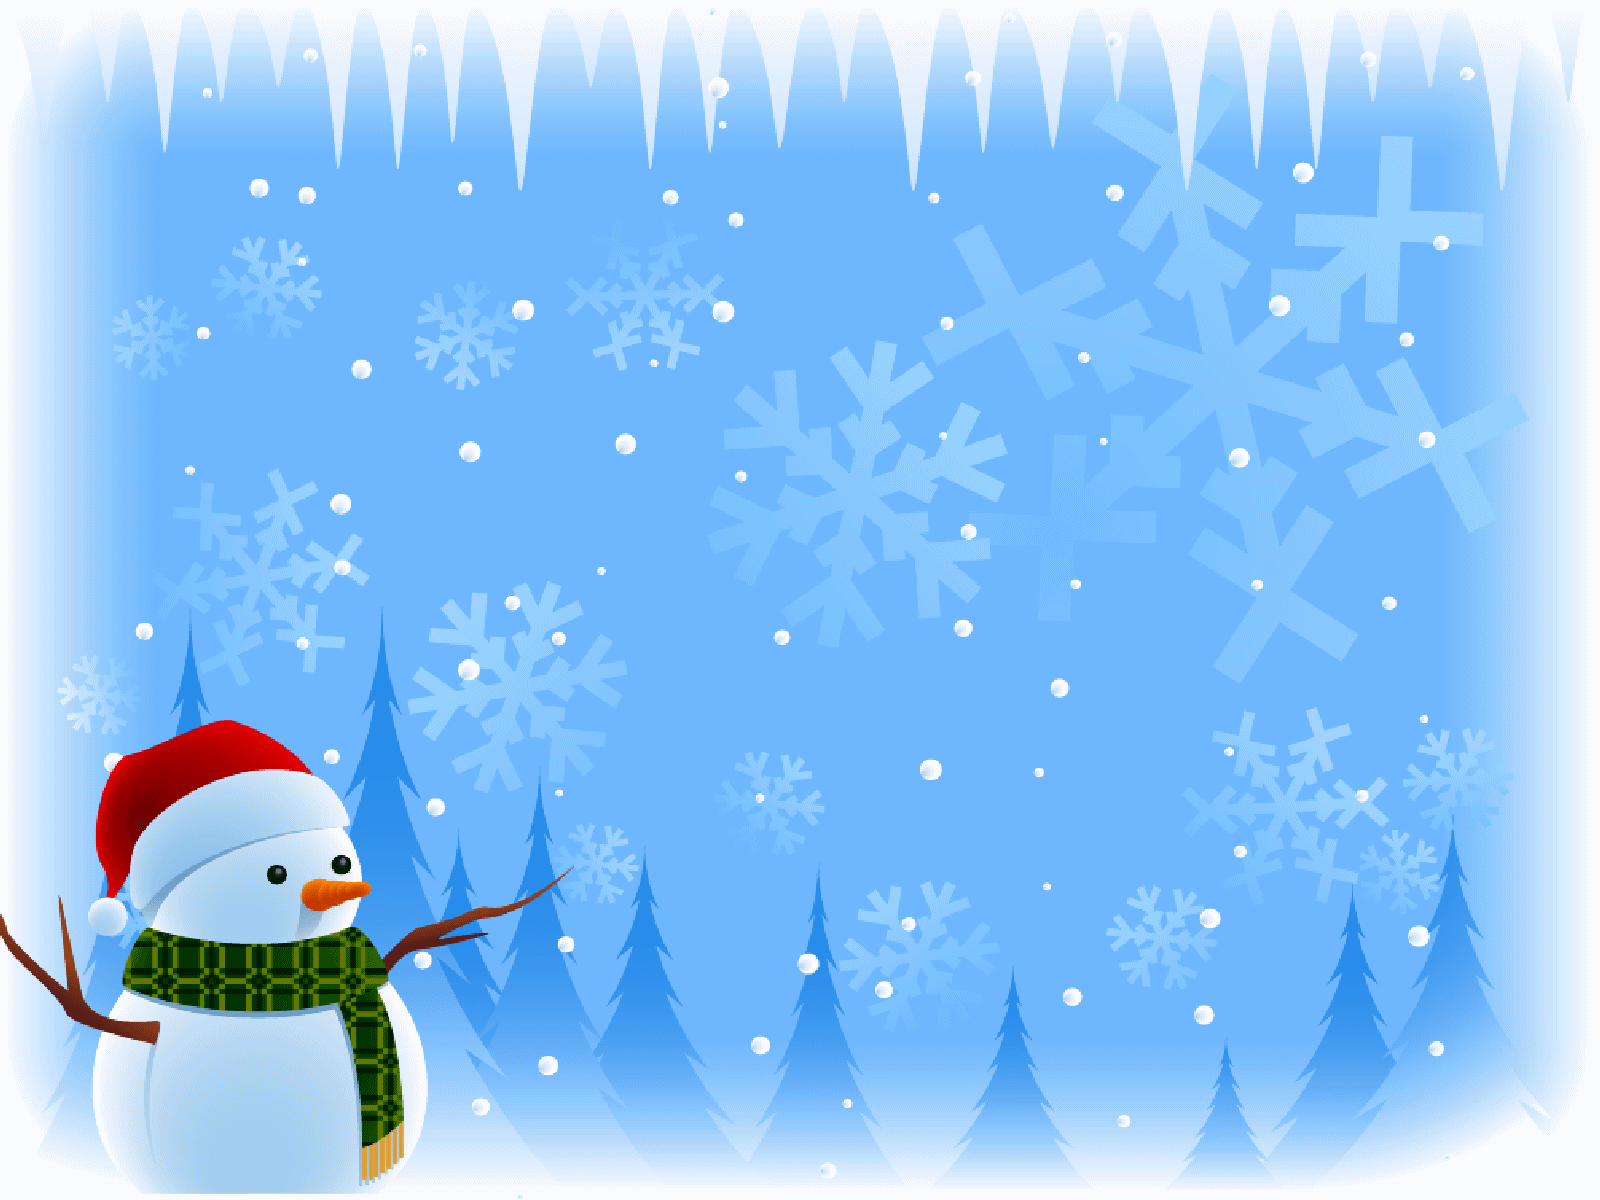 Christmas Snowman cartoon drawings template image for kids and